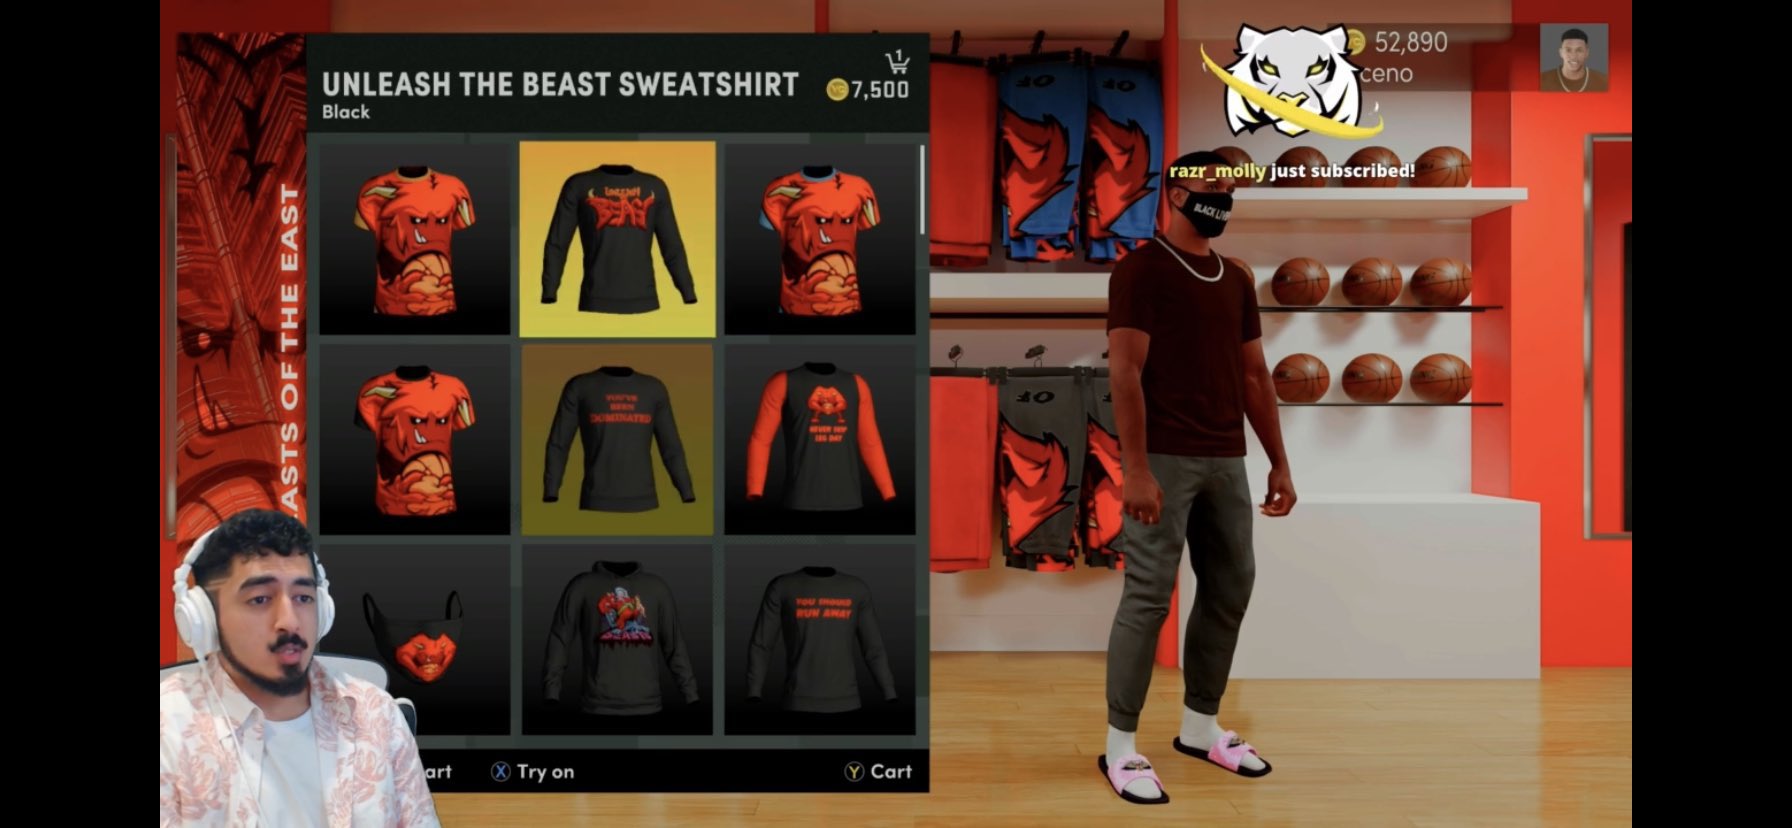 Nba2k21 News Beasts Of The Easts Affiliations Store Nba2k21